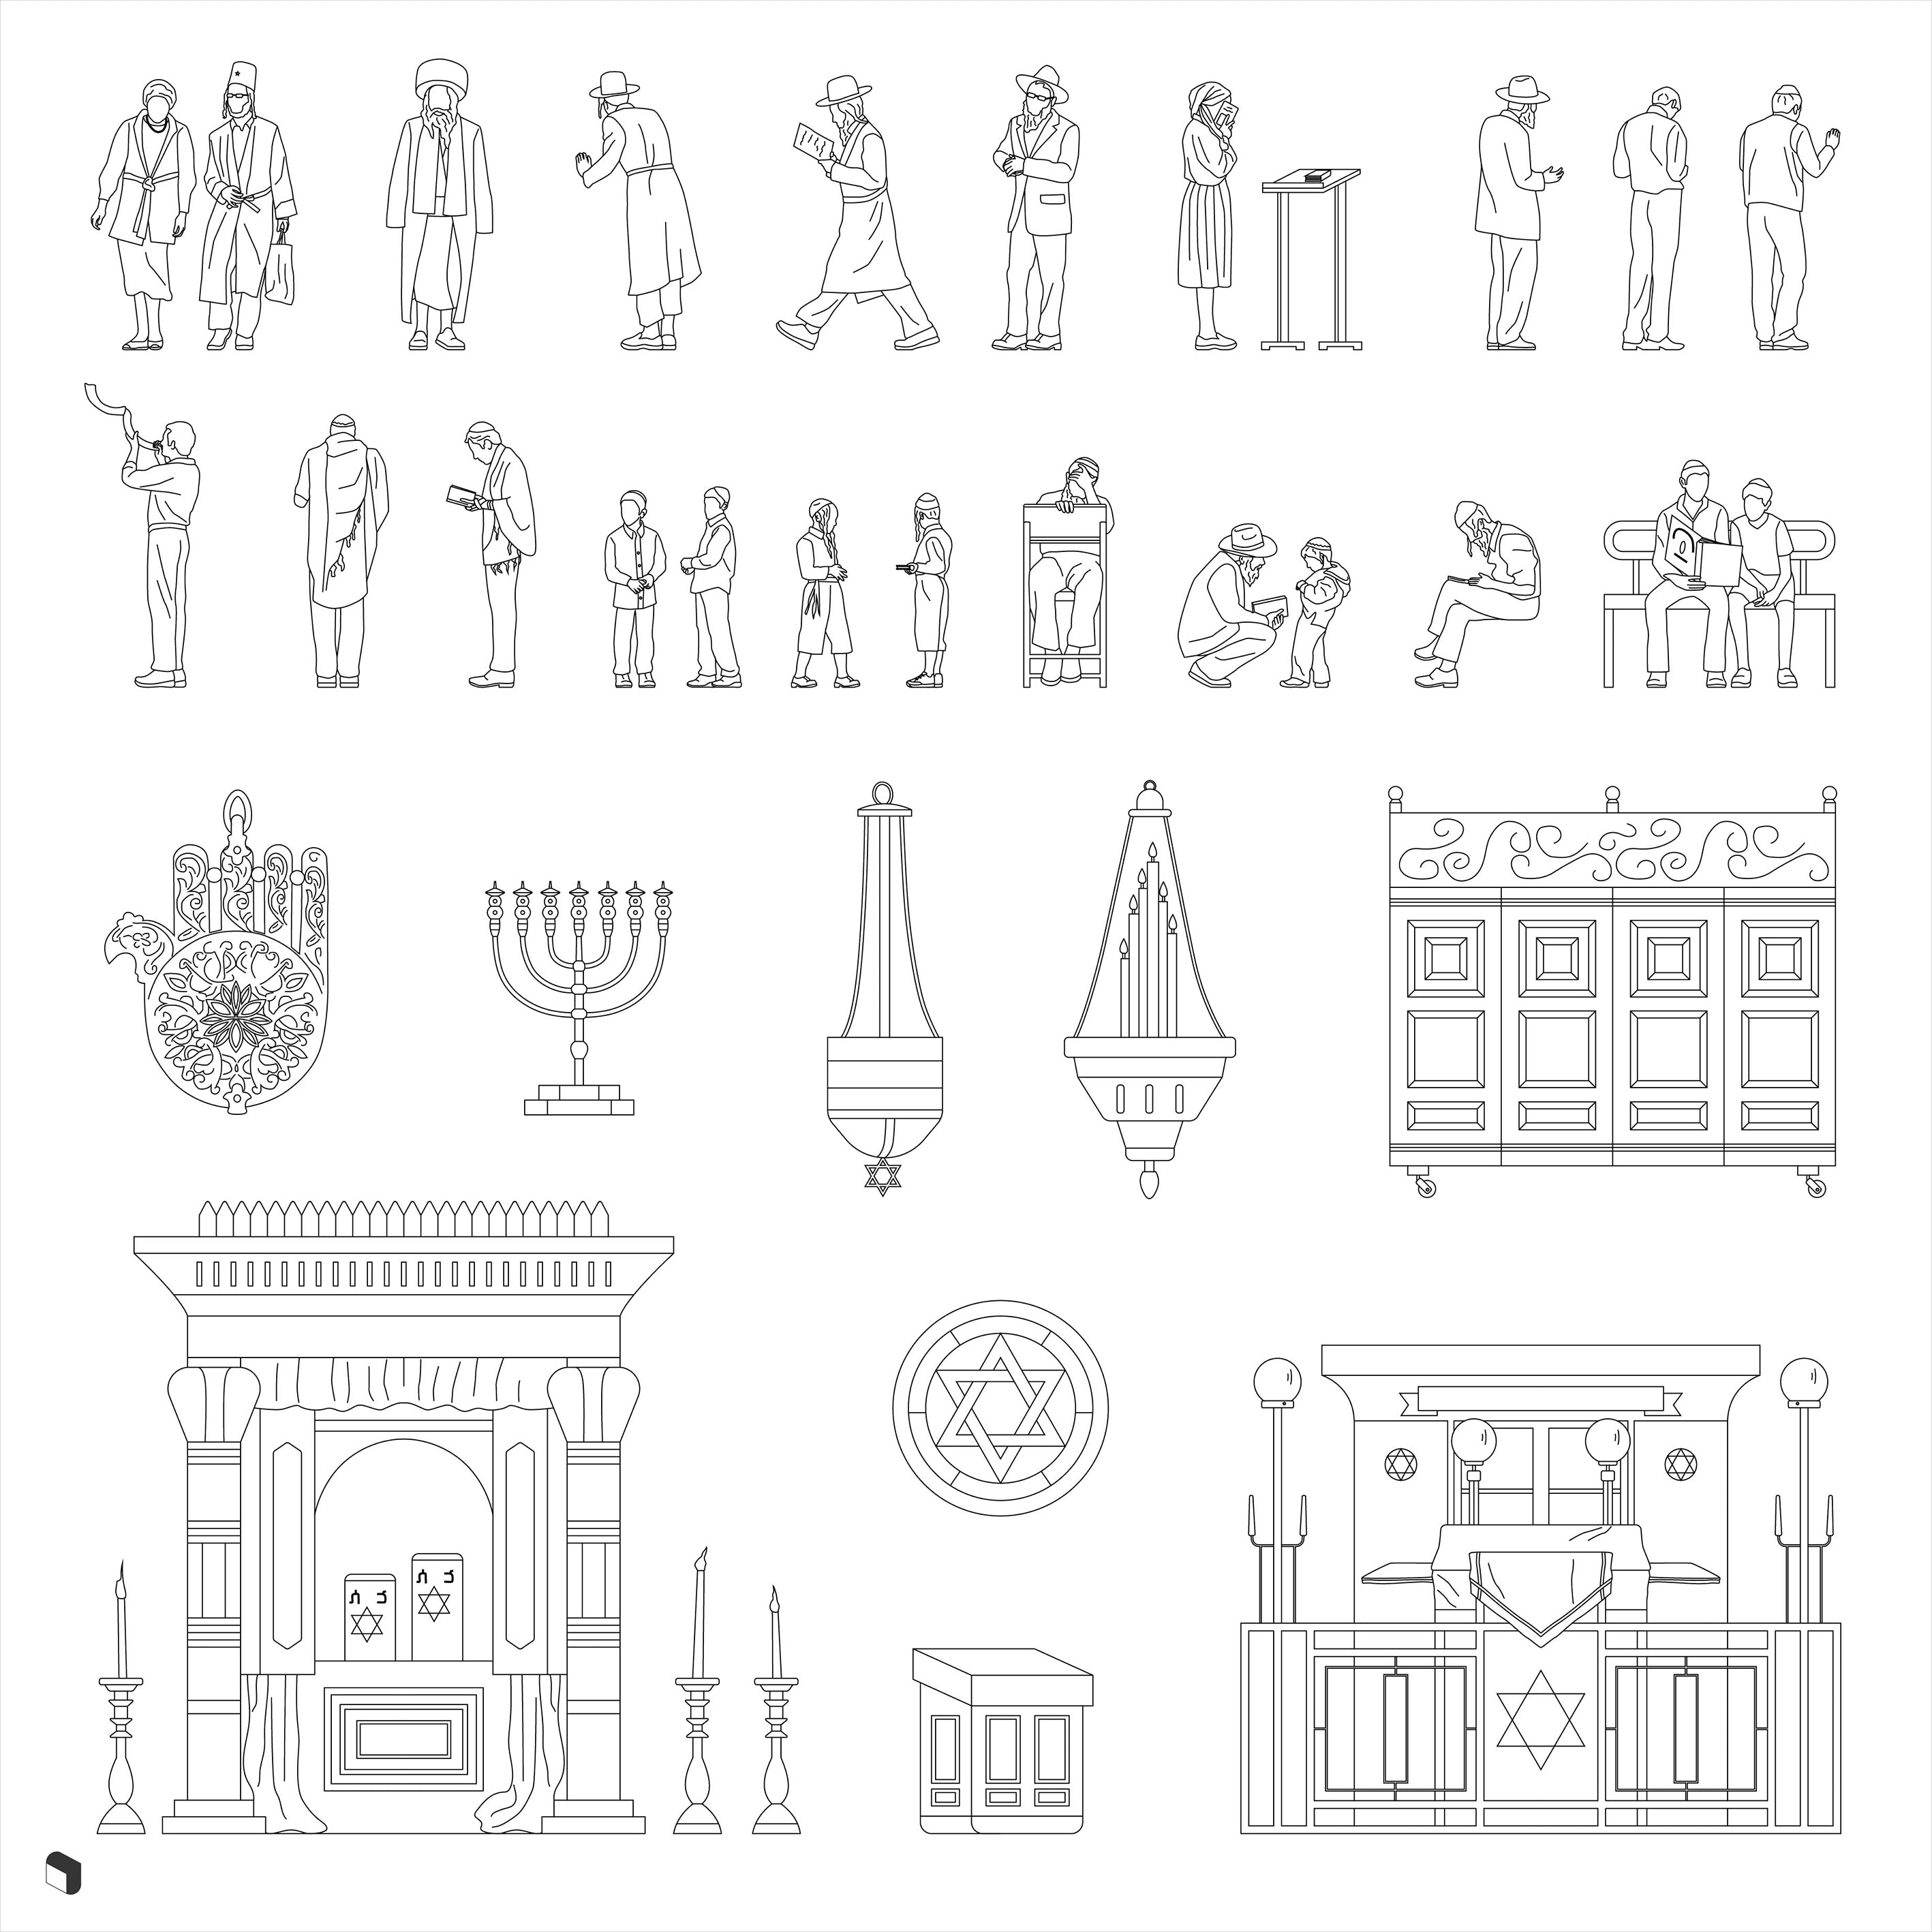 Cad Religion People 3 DWG | Toffu Co